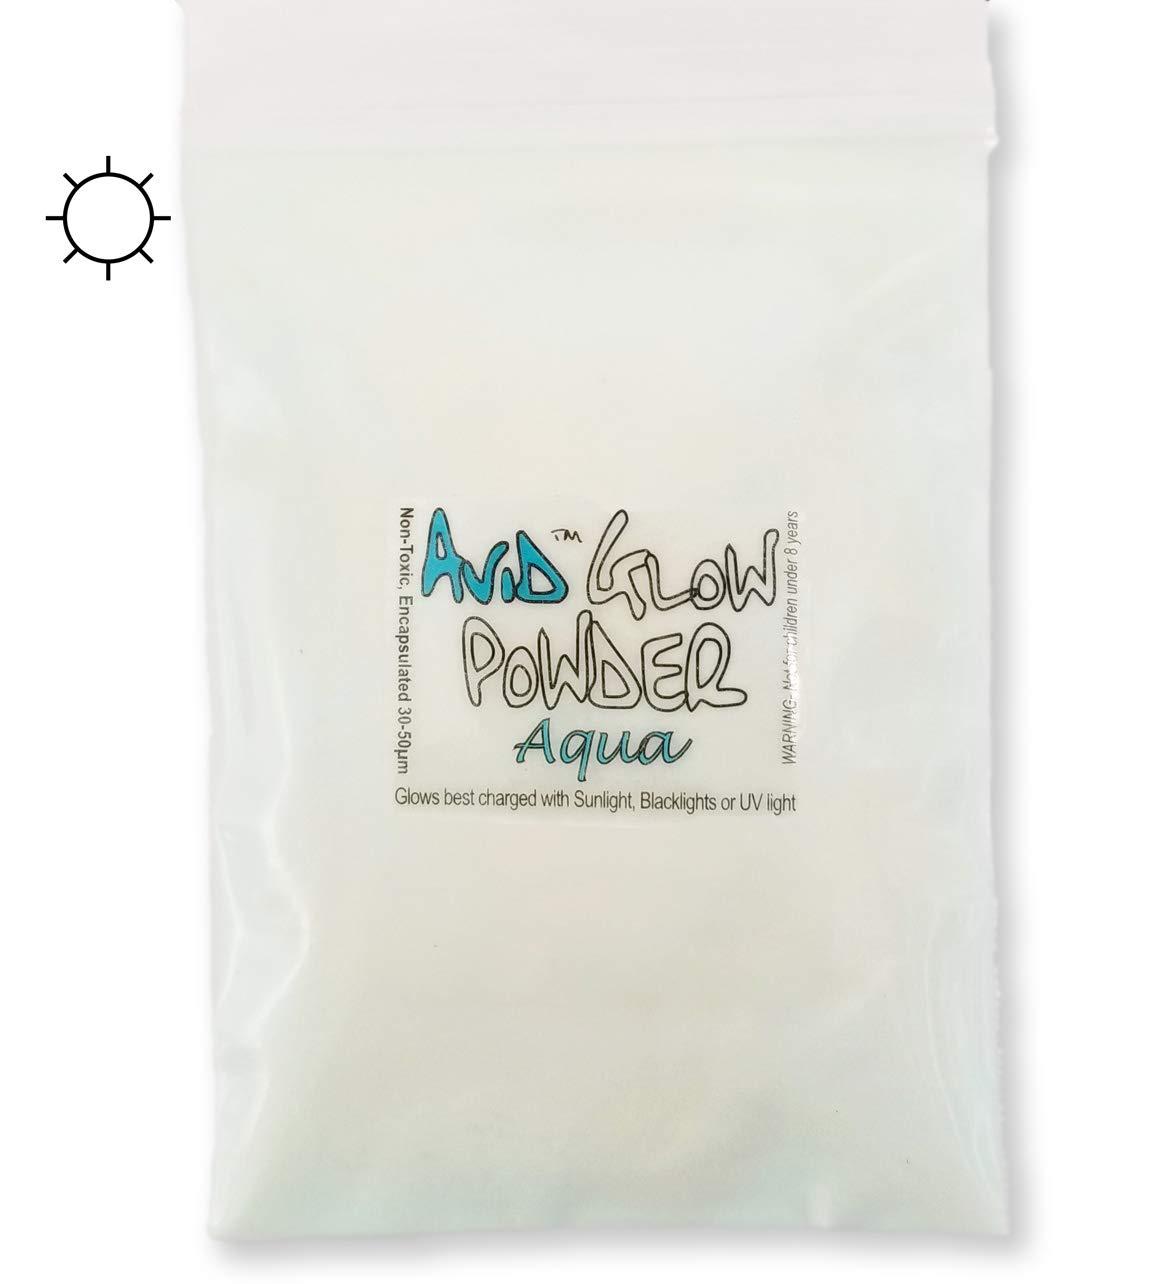 The Avid Colorist aqua glow powder-2.9oz (80g) neutral in daylight blue/green glow in the dark pigment powder for resin, slime, nail polish, pa